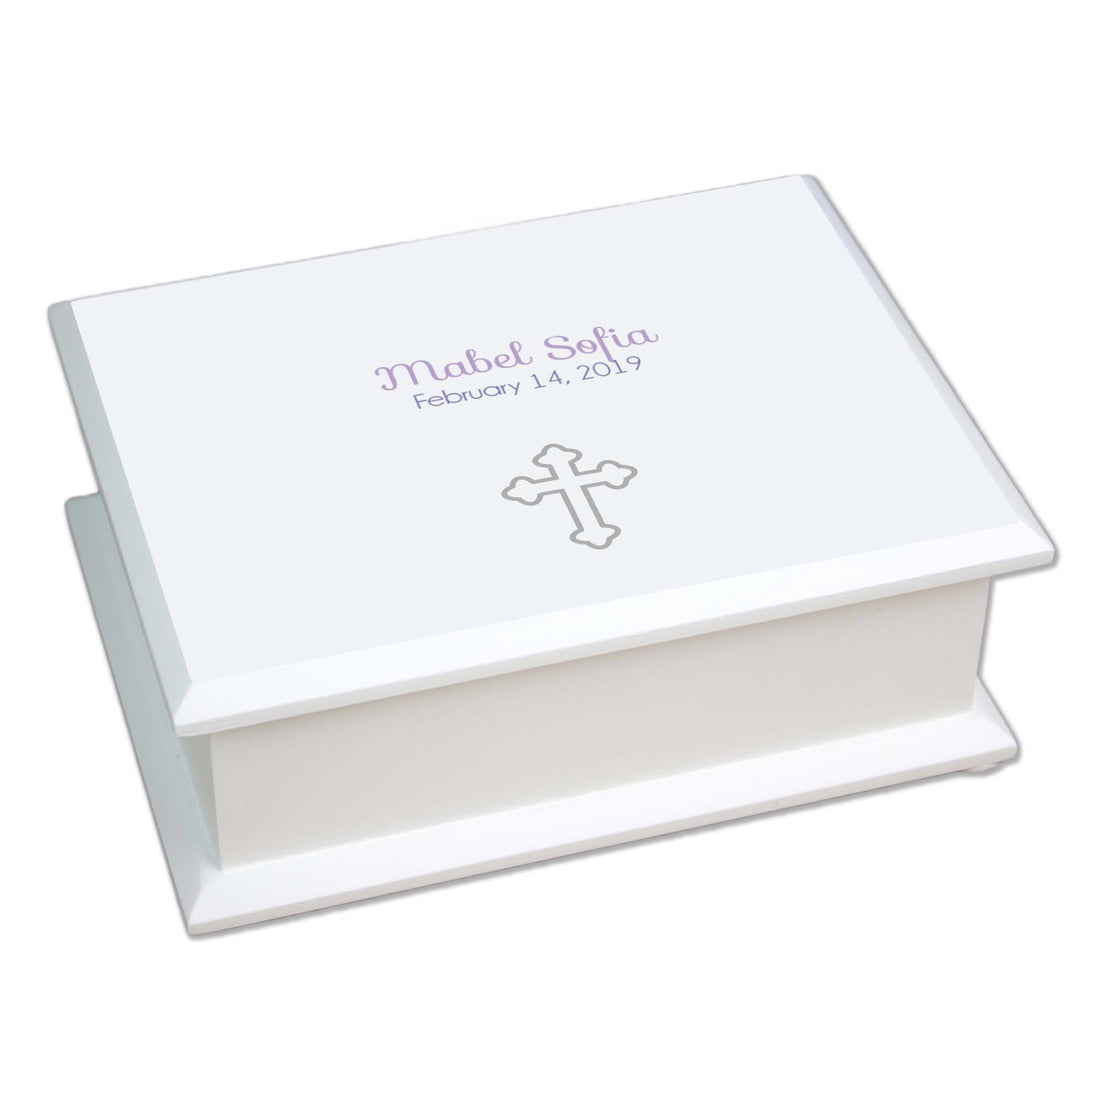 Personalized Lift Top Jewelry Box with Single Cross design